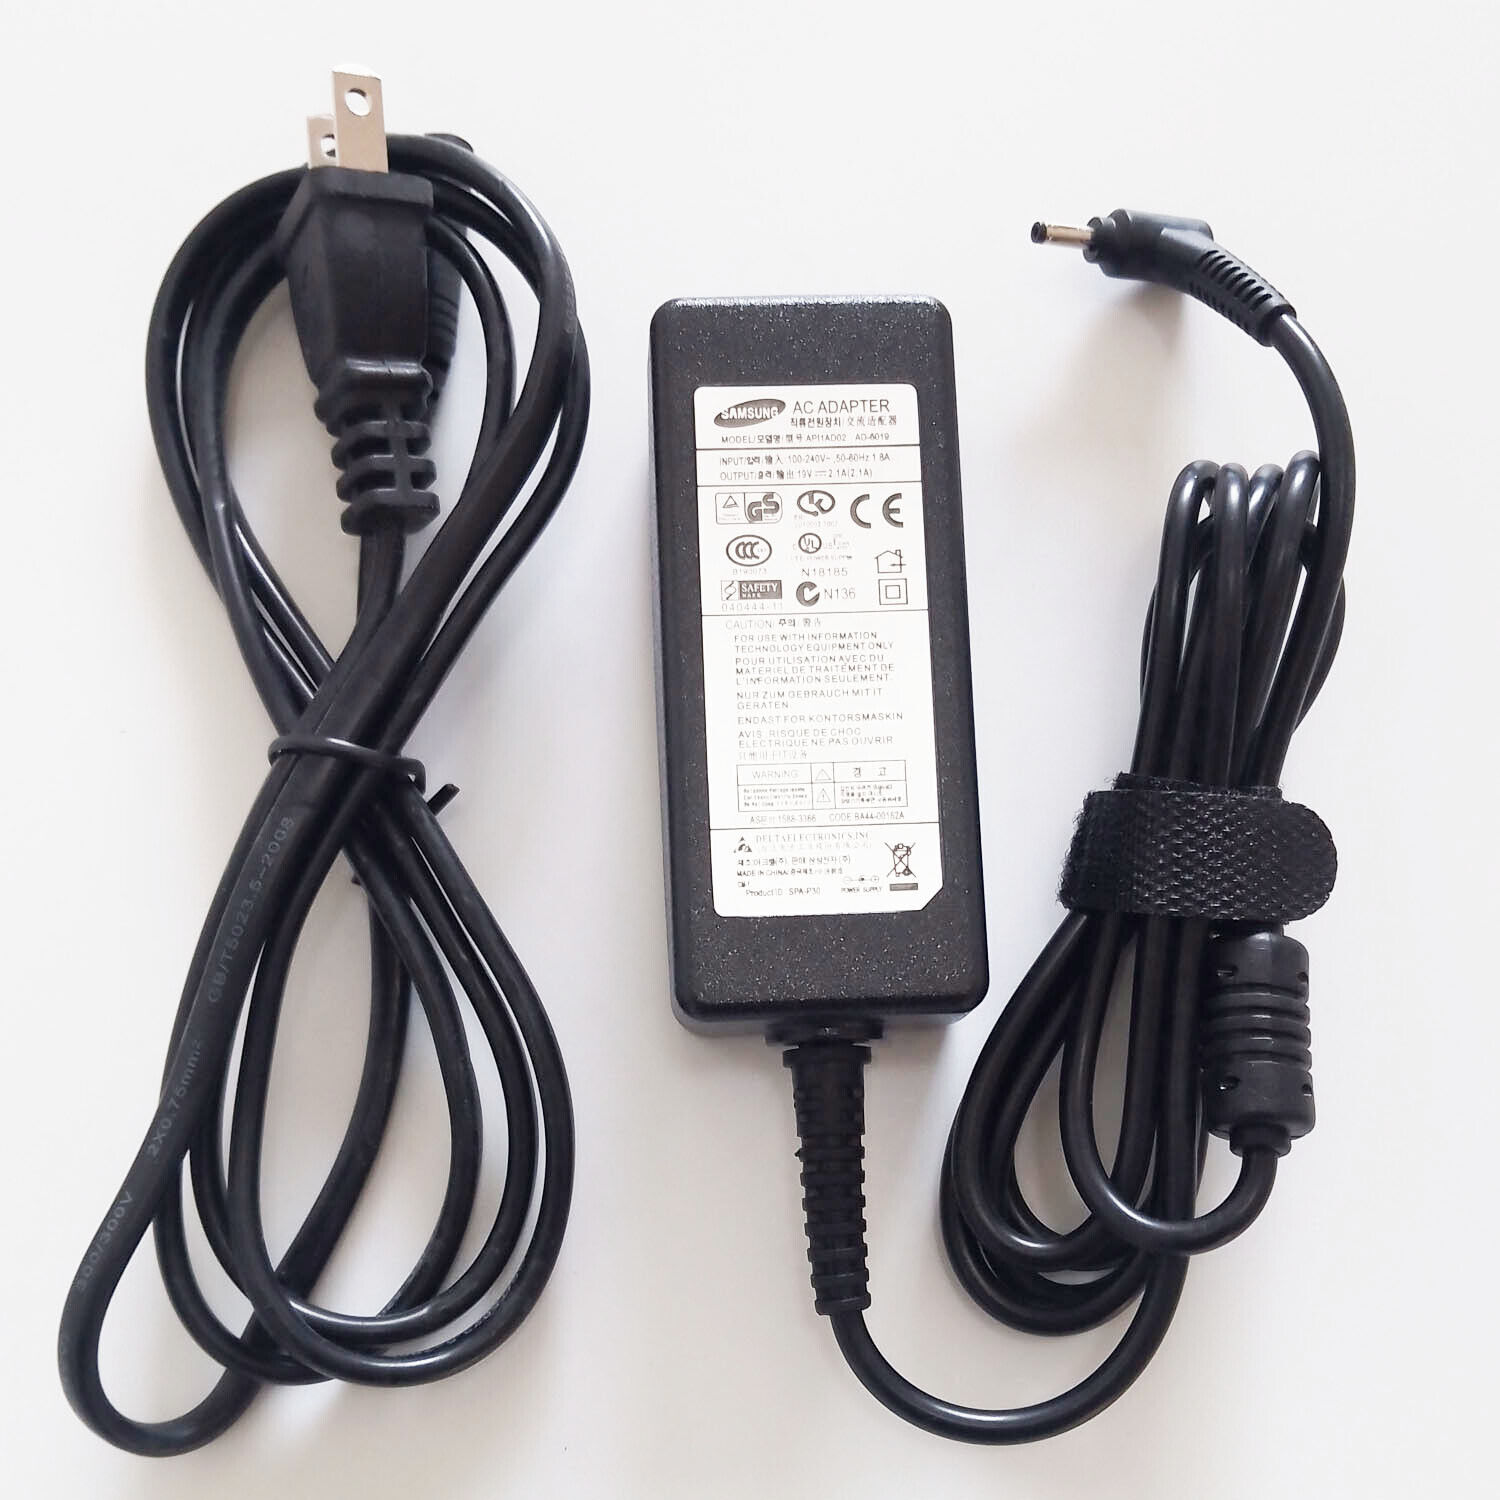 Original AC Adapter Charger For Samsung Series Slate 5/7/9 Netbook 19V 2.1A 40W